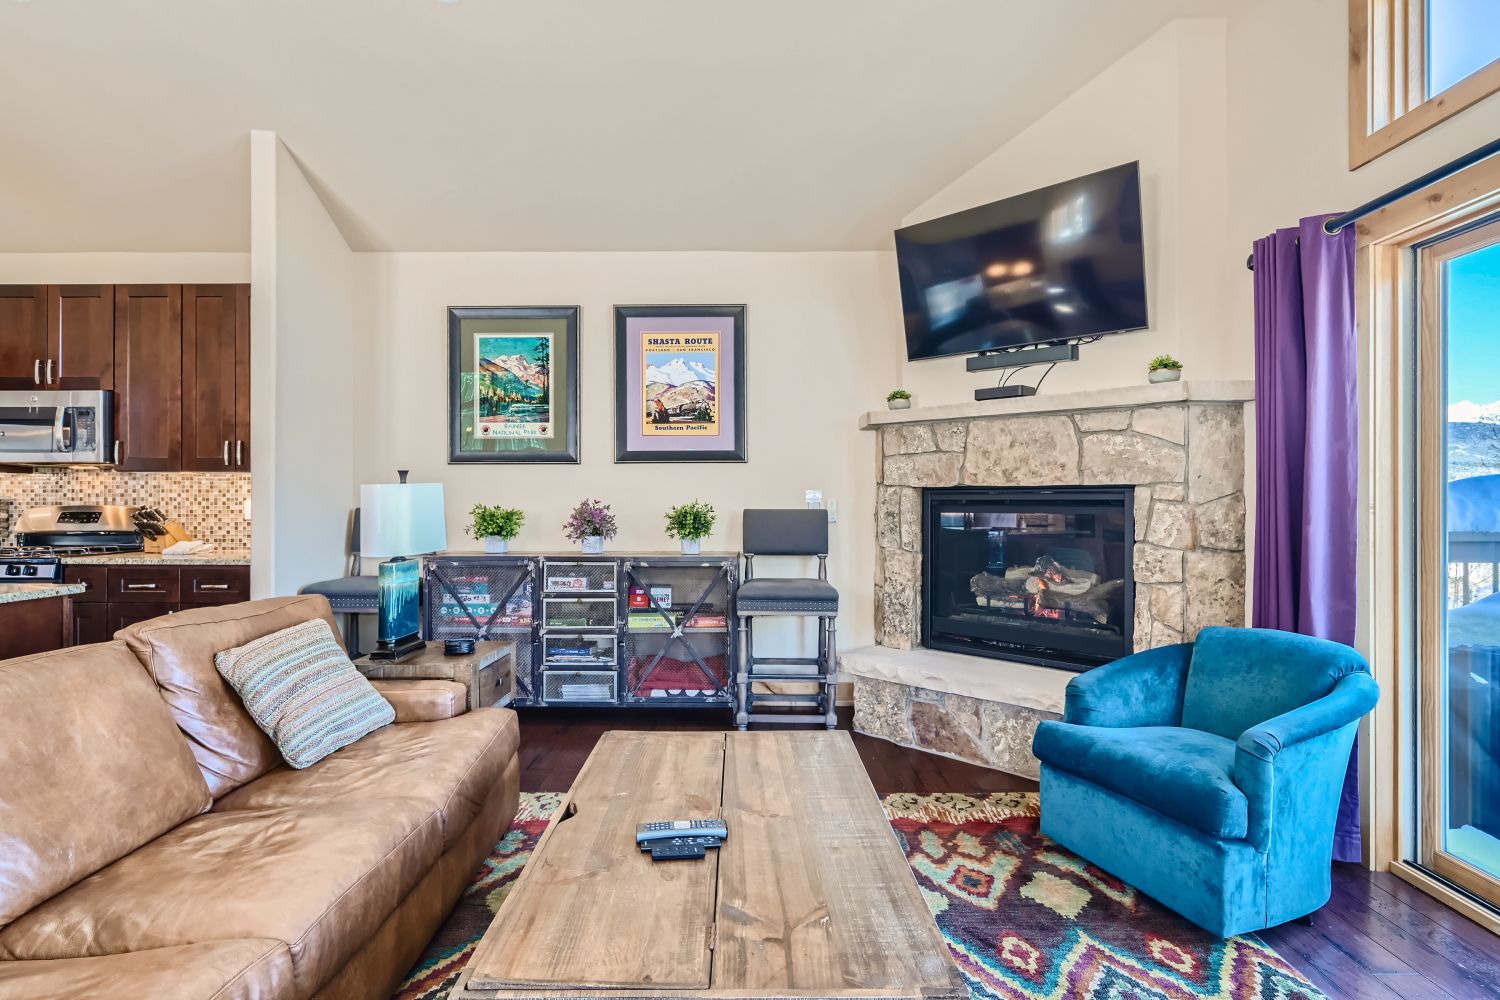 Welcome to Maggie Point Chalet - an upscale townhome just minutes away from the slopes & downtown Breckenridge! - 